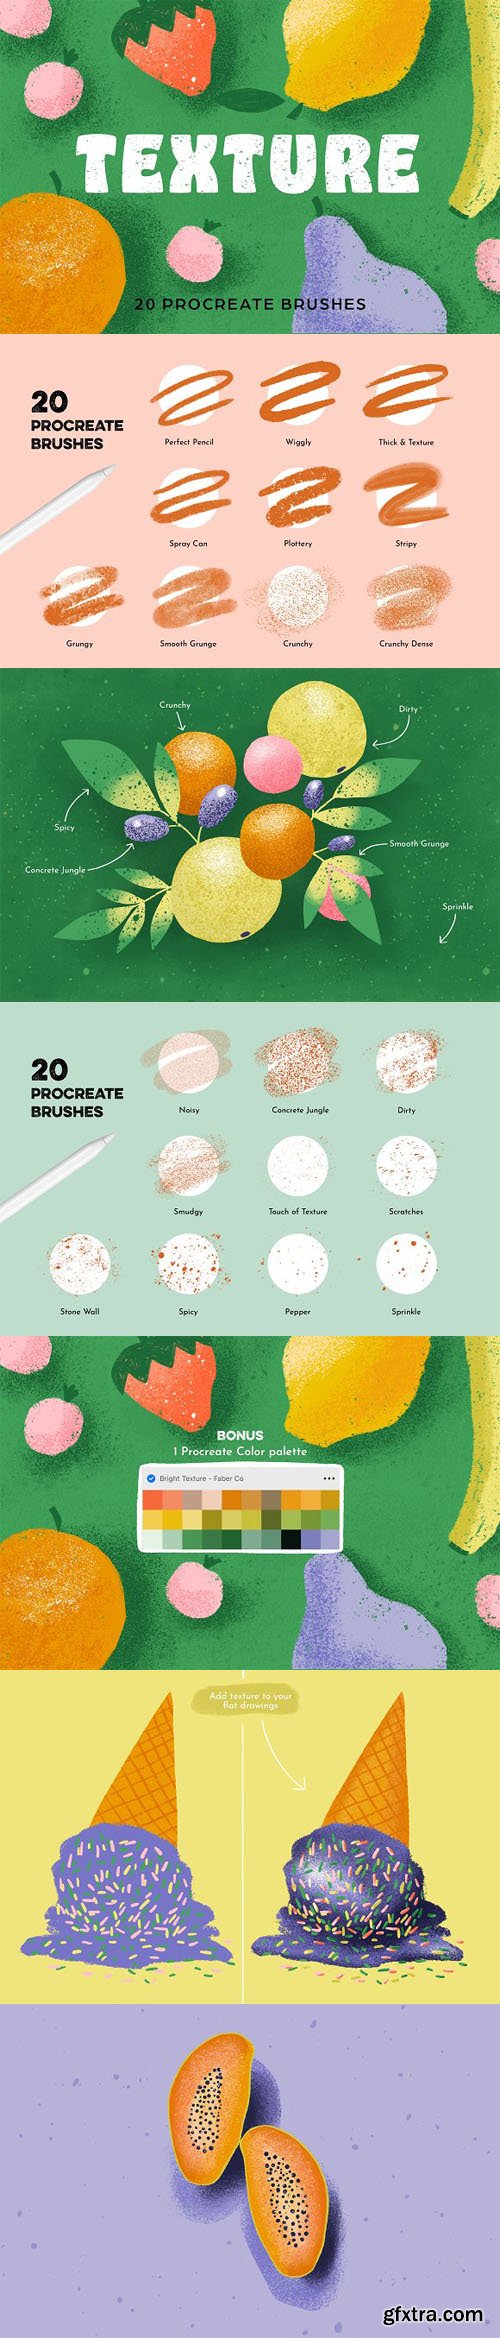 20 Texture Brushes for Procreate